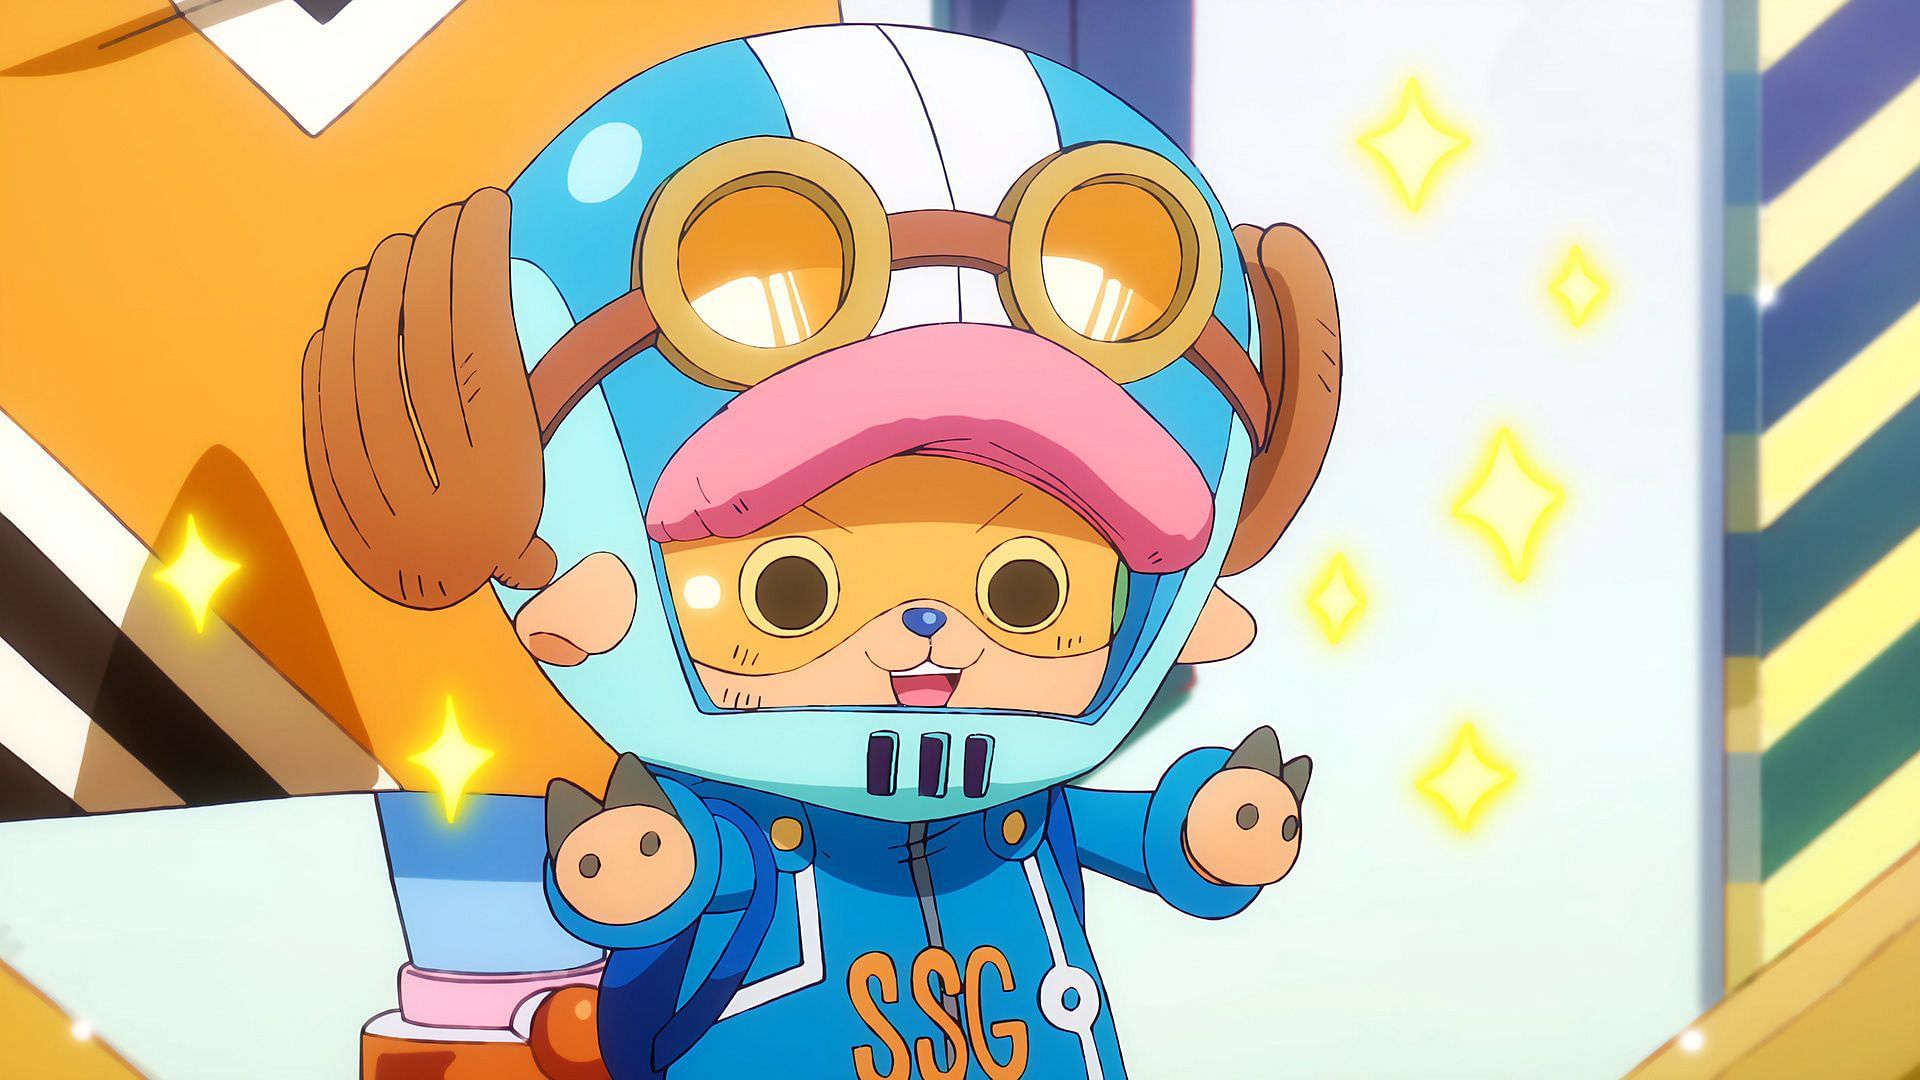 Chopper as seen in the One Piece anime (Image via Toei Animation)